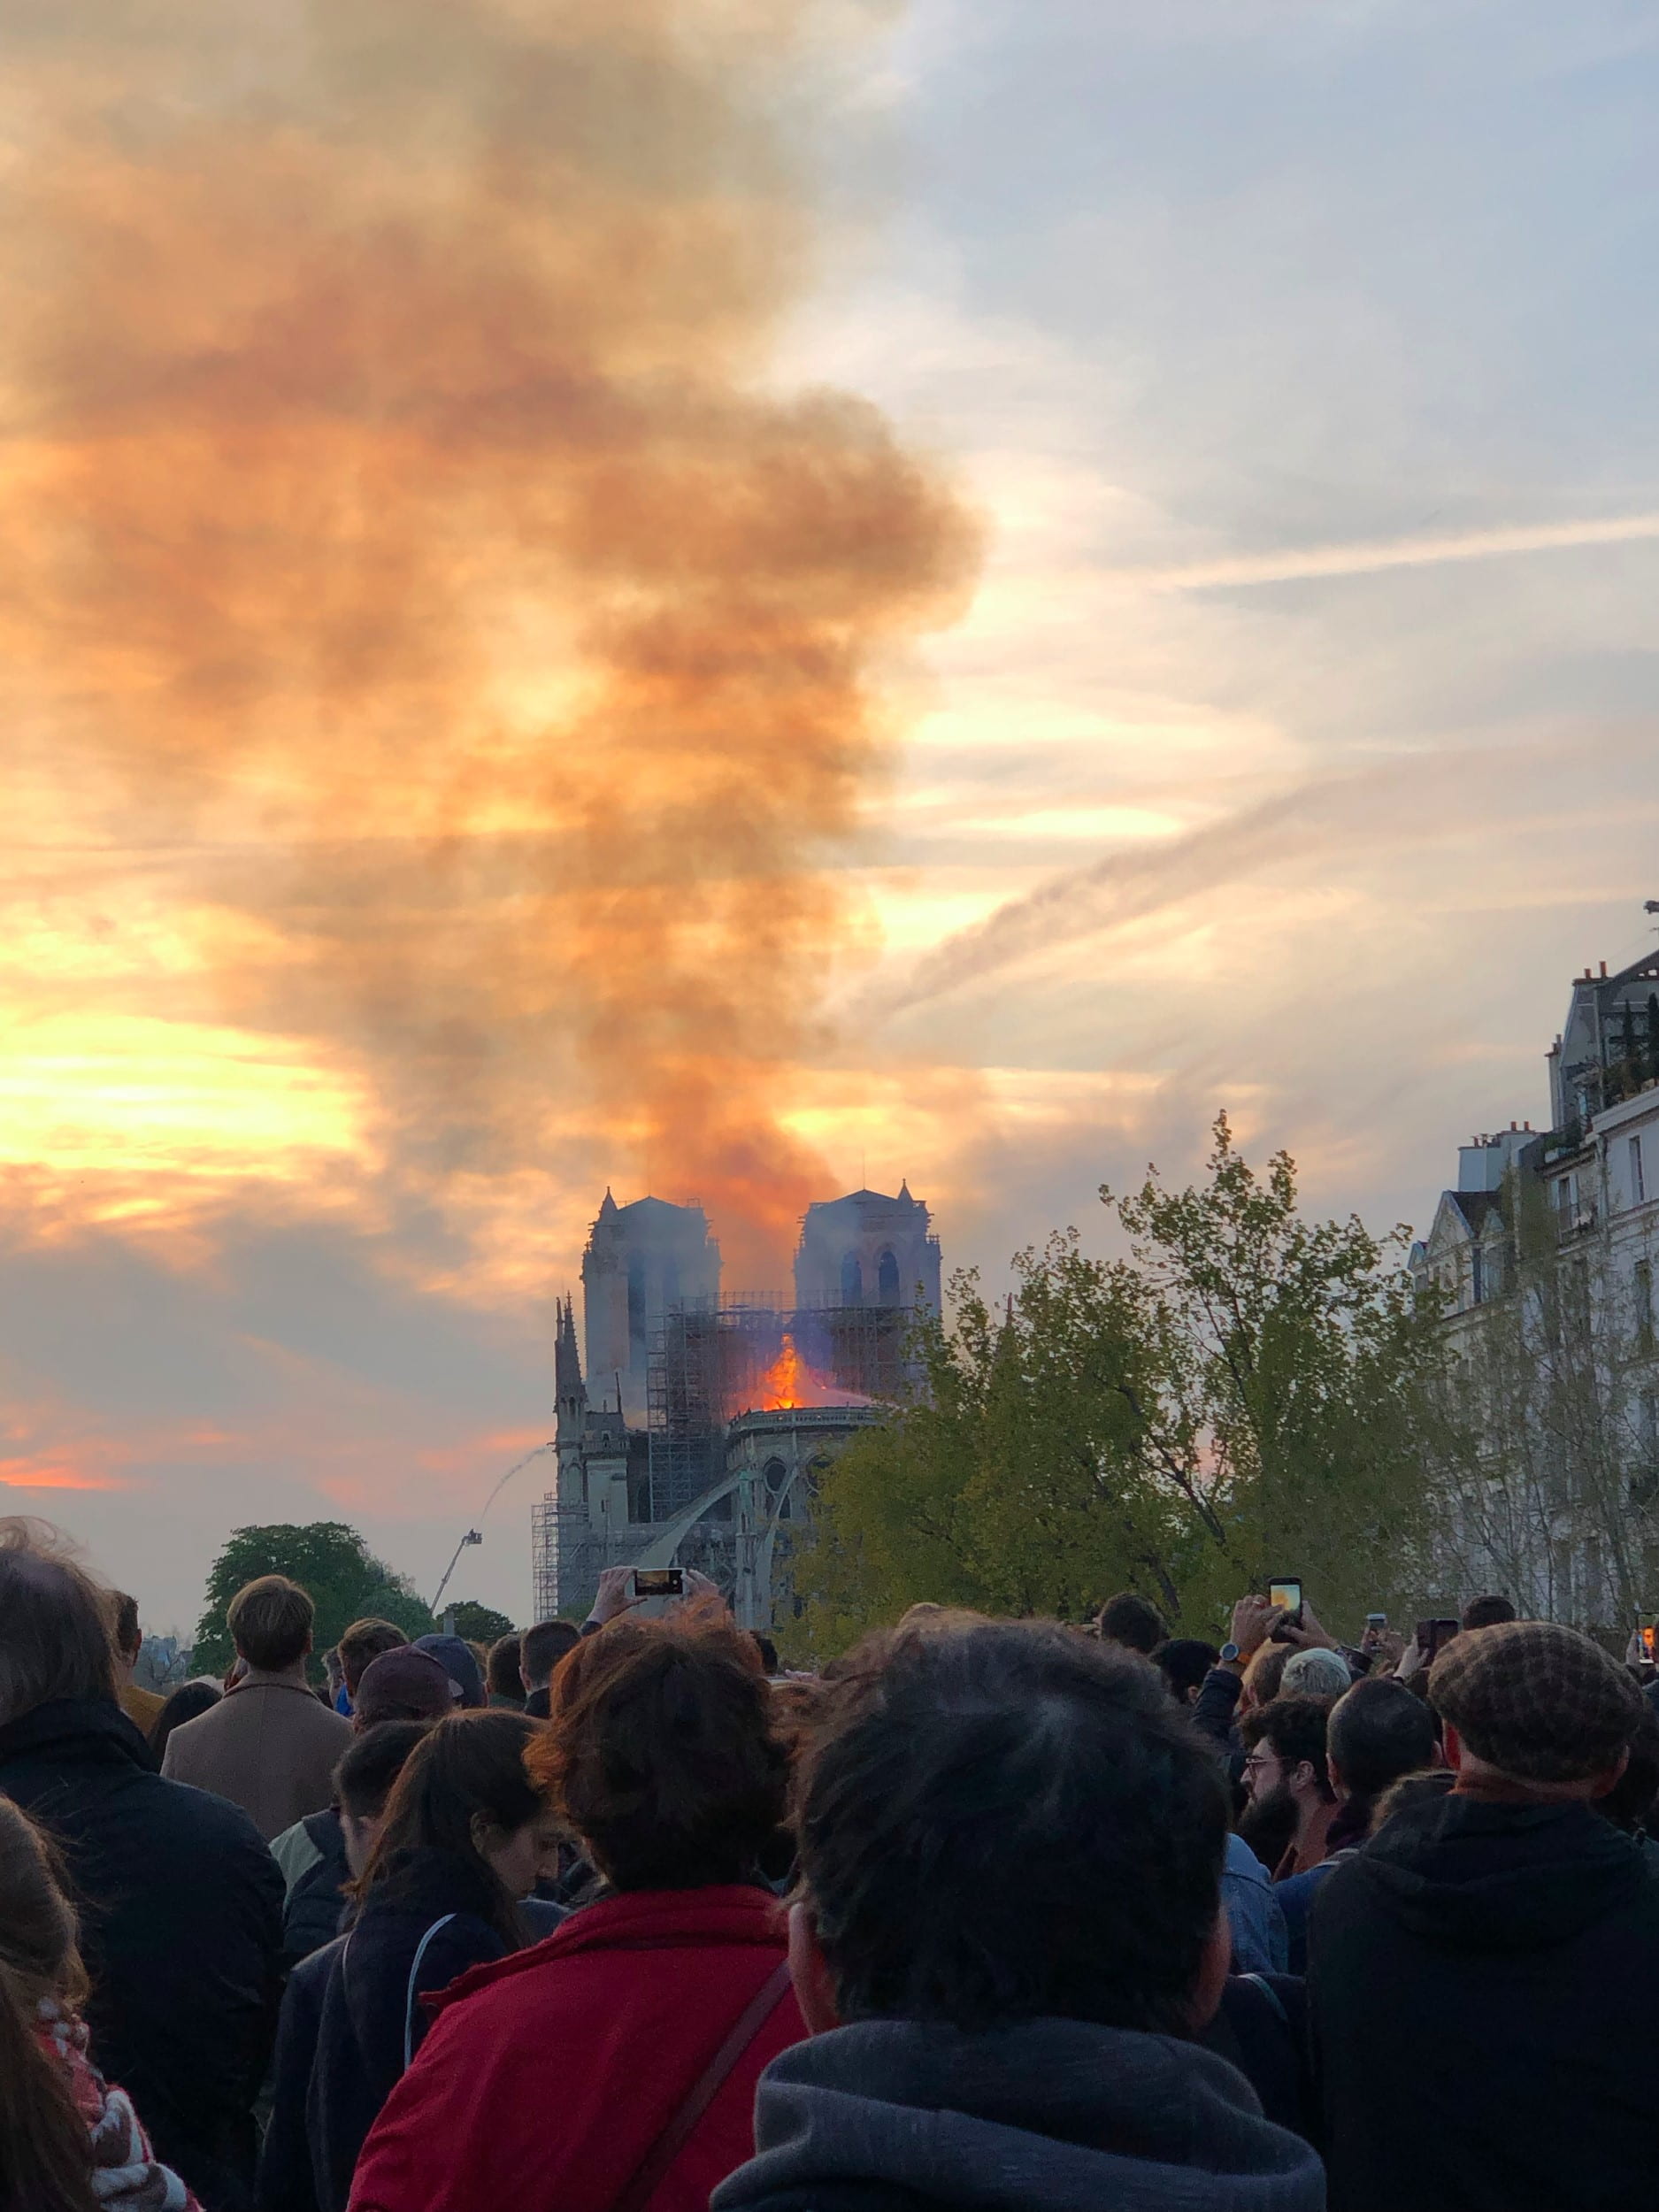 Lots of people watching the Notre Dame in Paris burn, flames and lots of smoke in the background